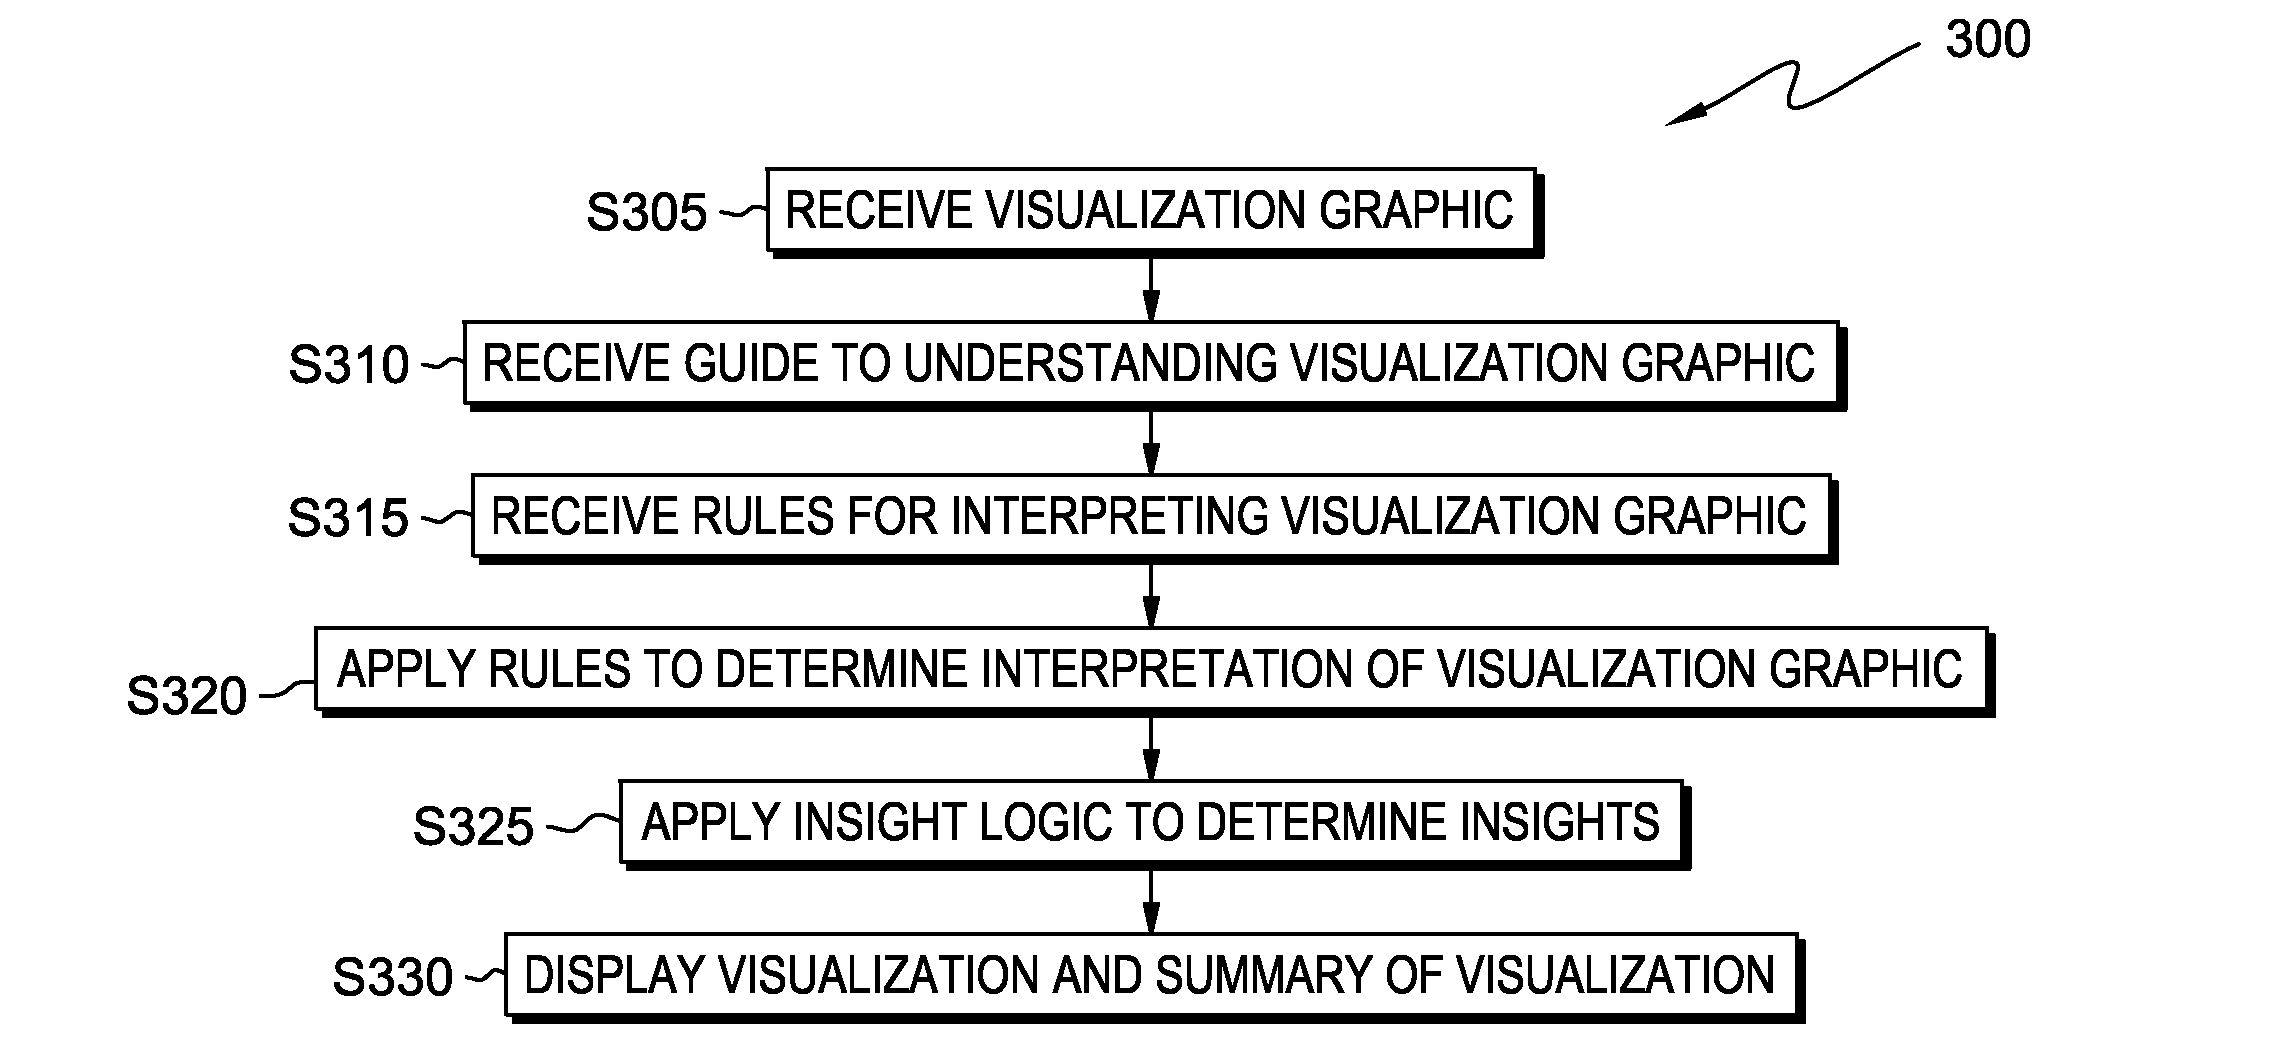 Presenting meaningful information summary for analyzing complex visualizations